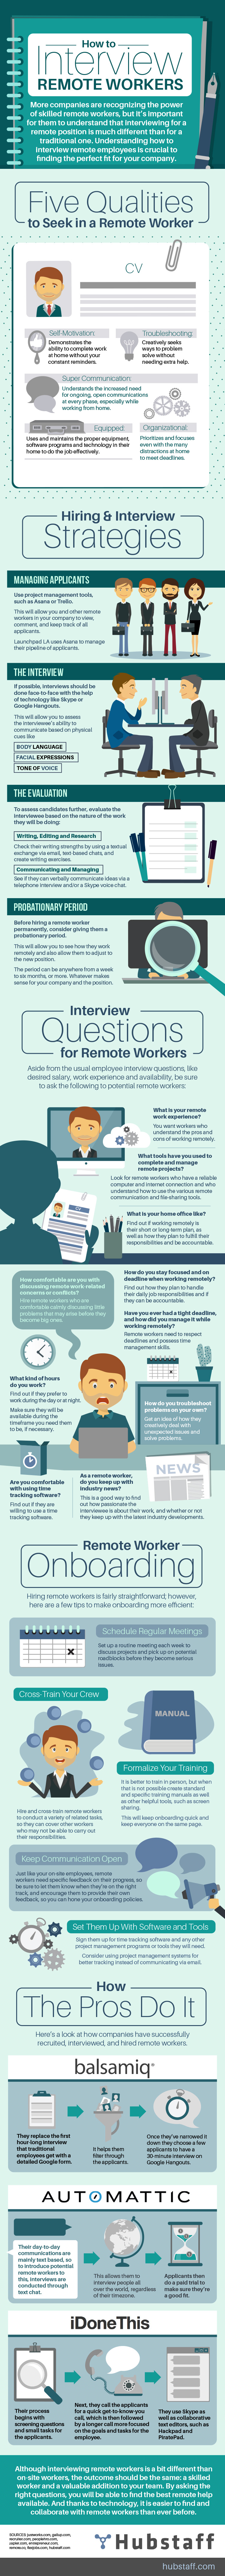 How to Interview Remote Workers [Infographic] | SEJ